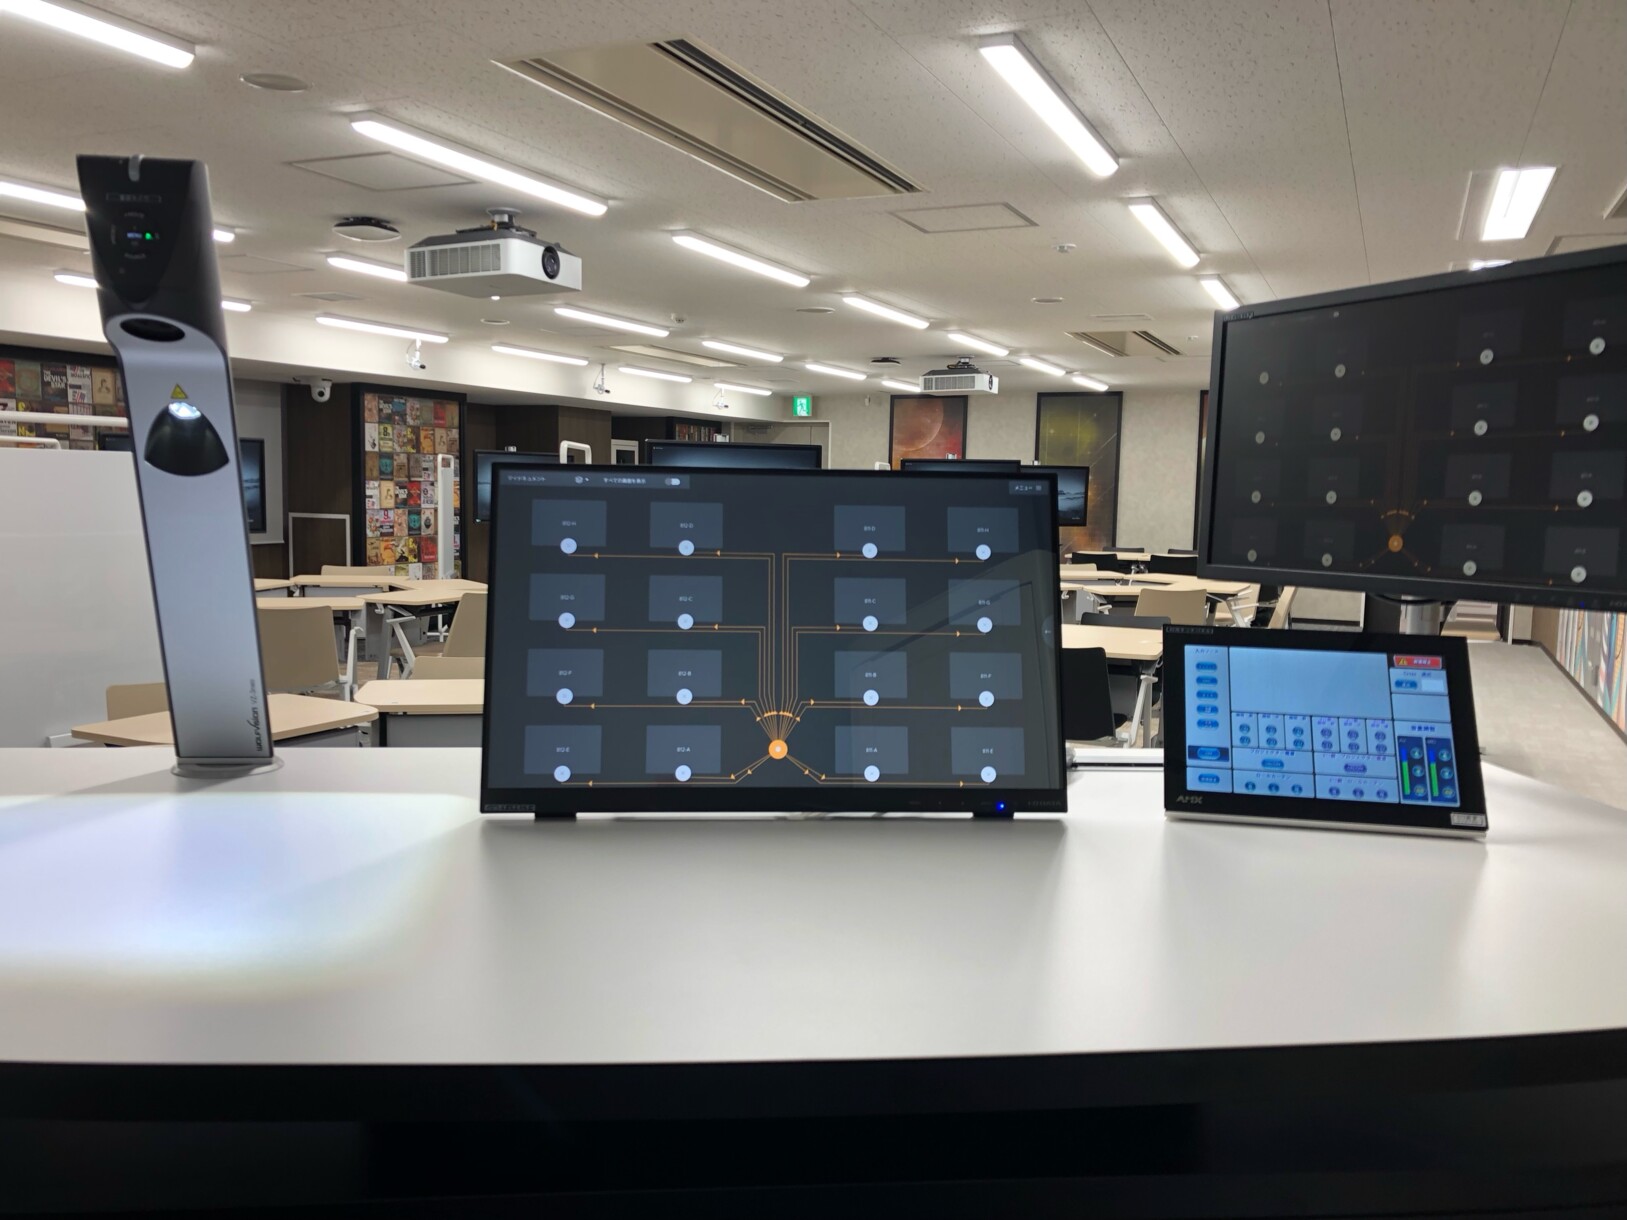 Lectern showing customised ‘Room View‘ with 16 workstations, facilitating easy drag & drop display of onscreen content, plus VZ-3neo Visualizer for display of physical content materials.